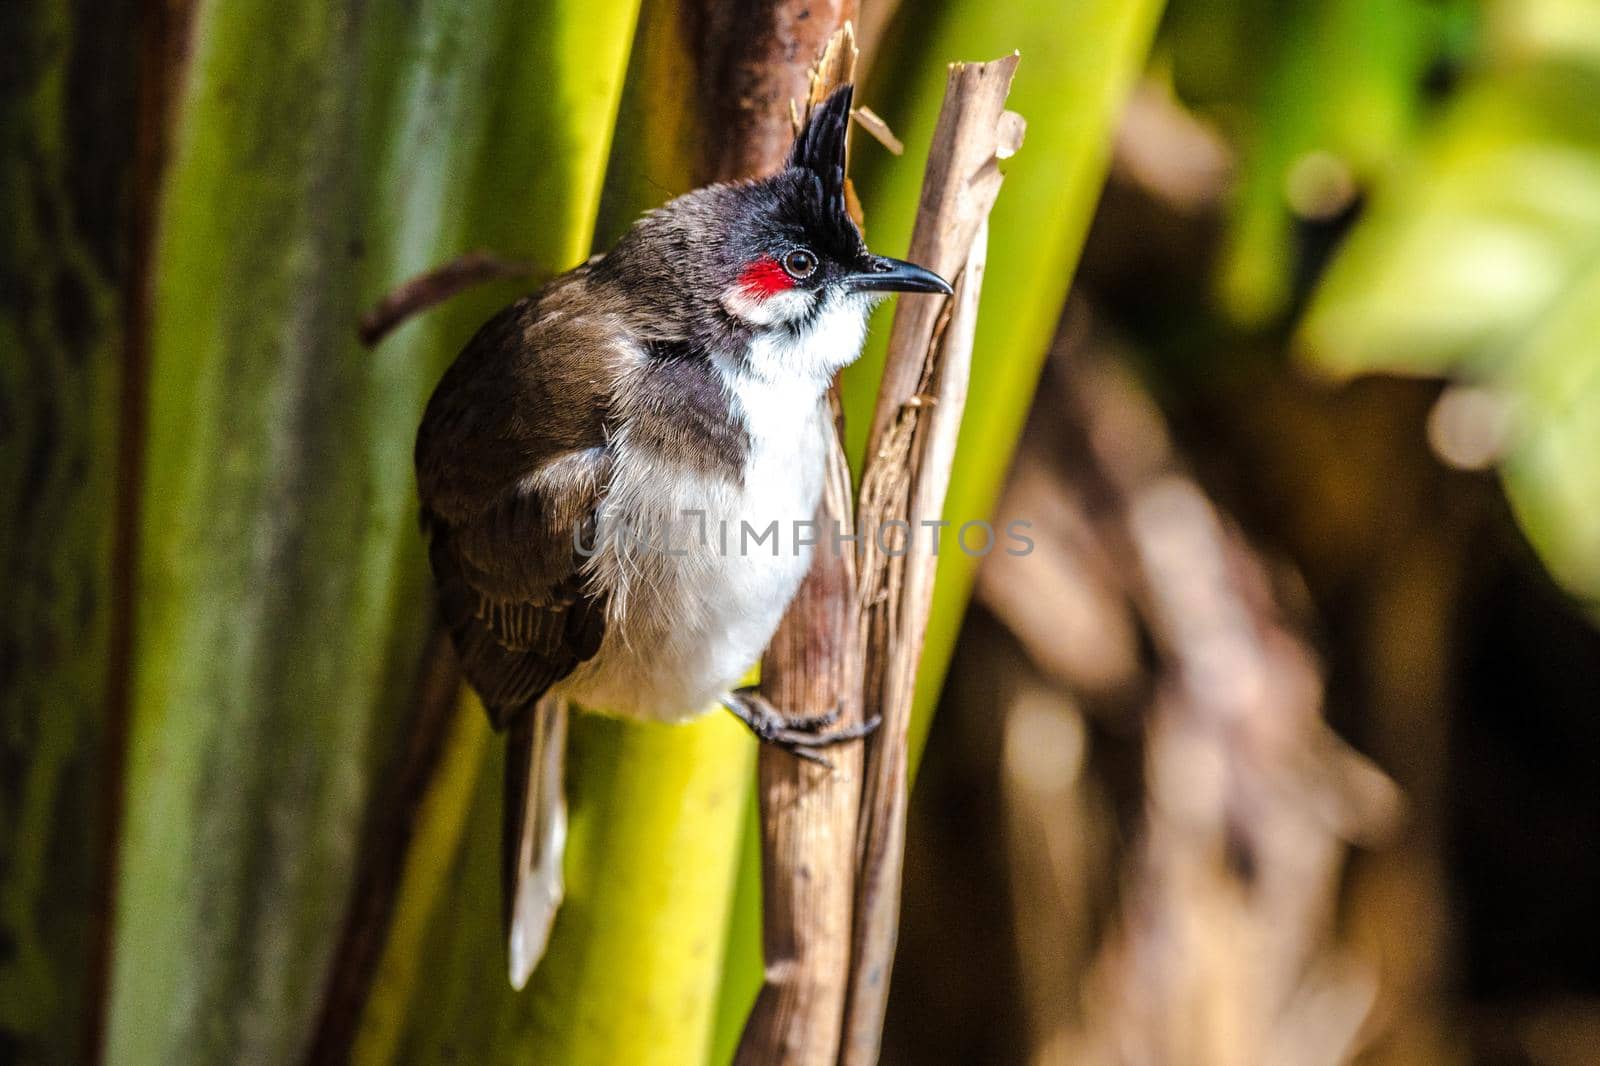 Southeast Asian Red-whiskered bulbul (Pycnonotus jocosus), Mauritius, Africa by Weltblick